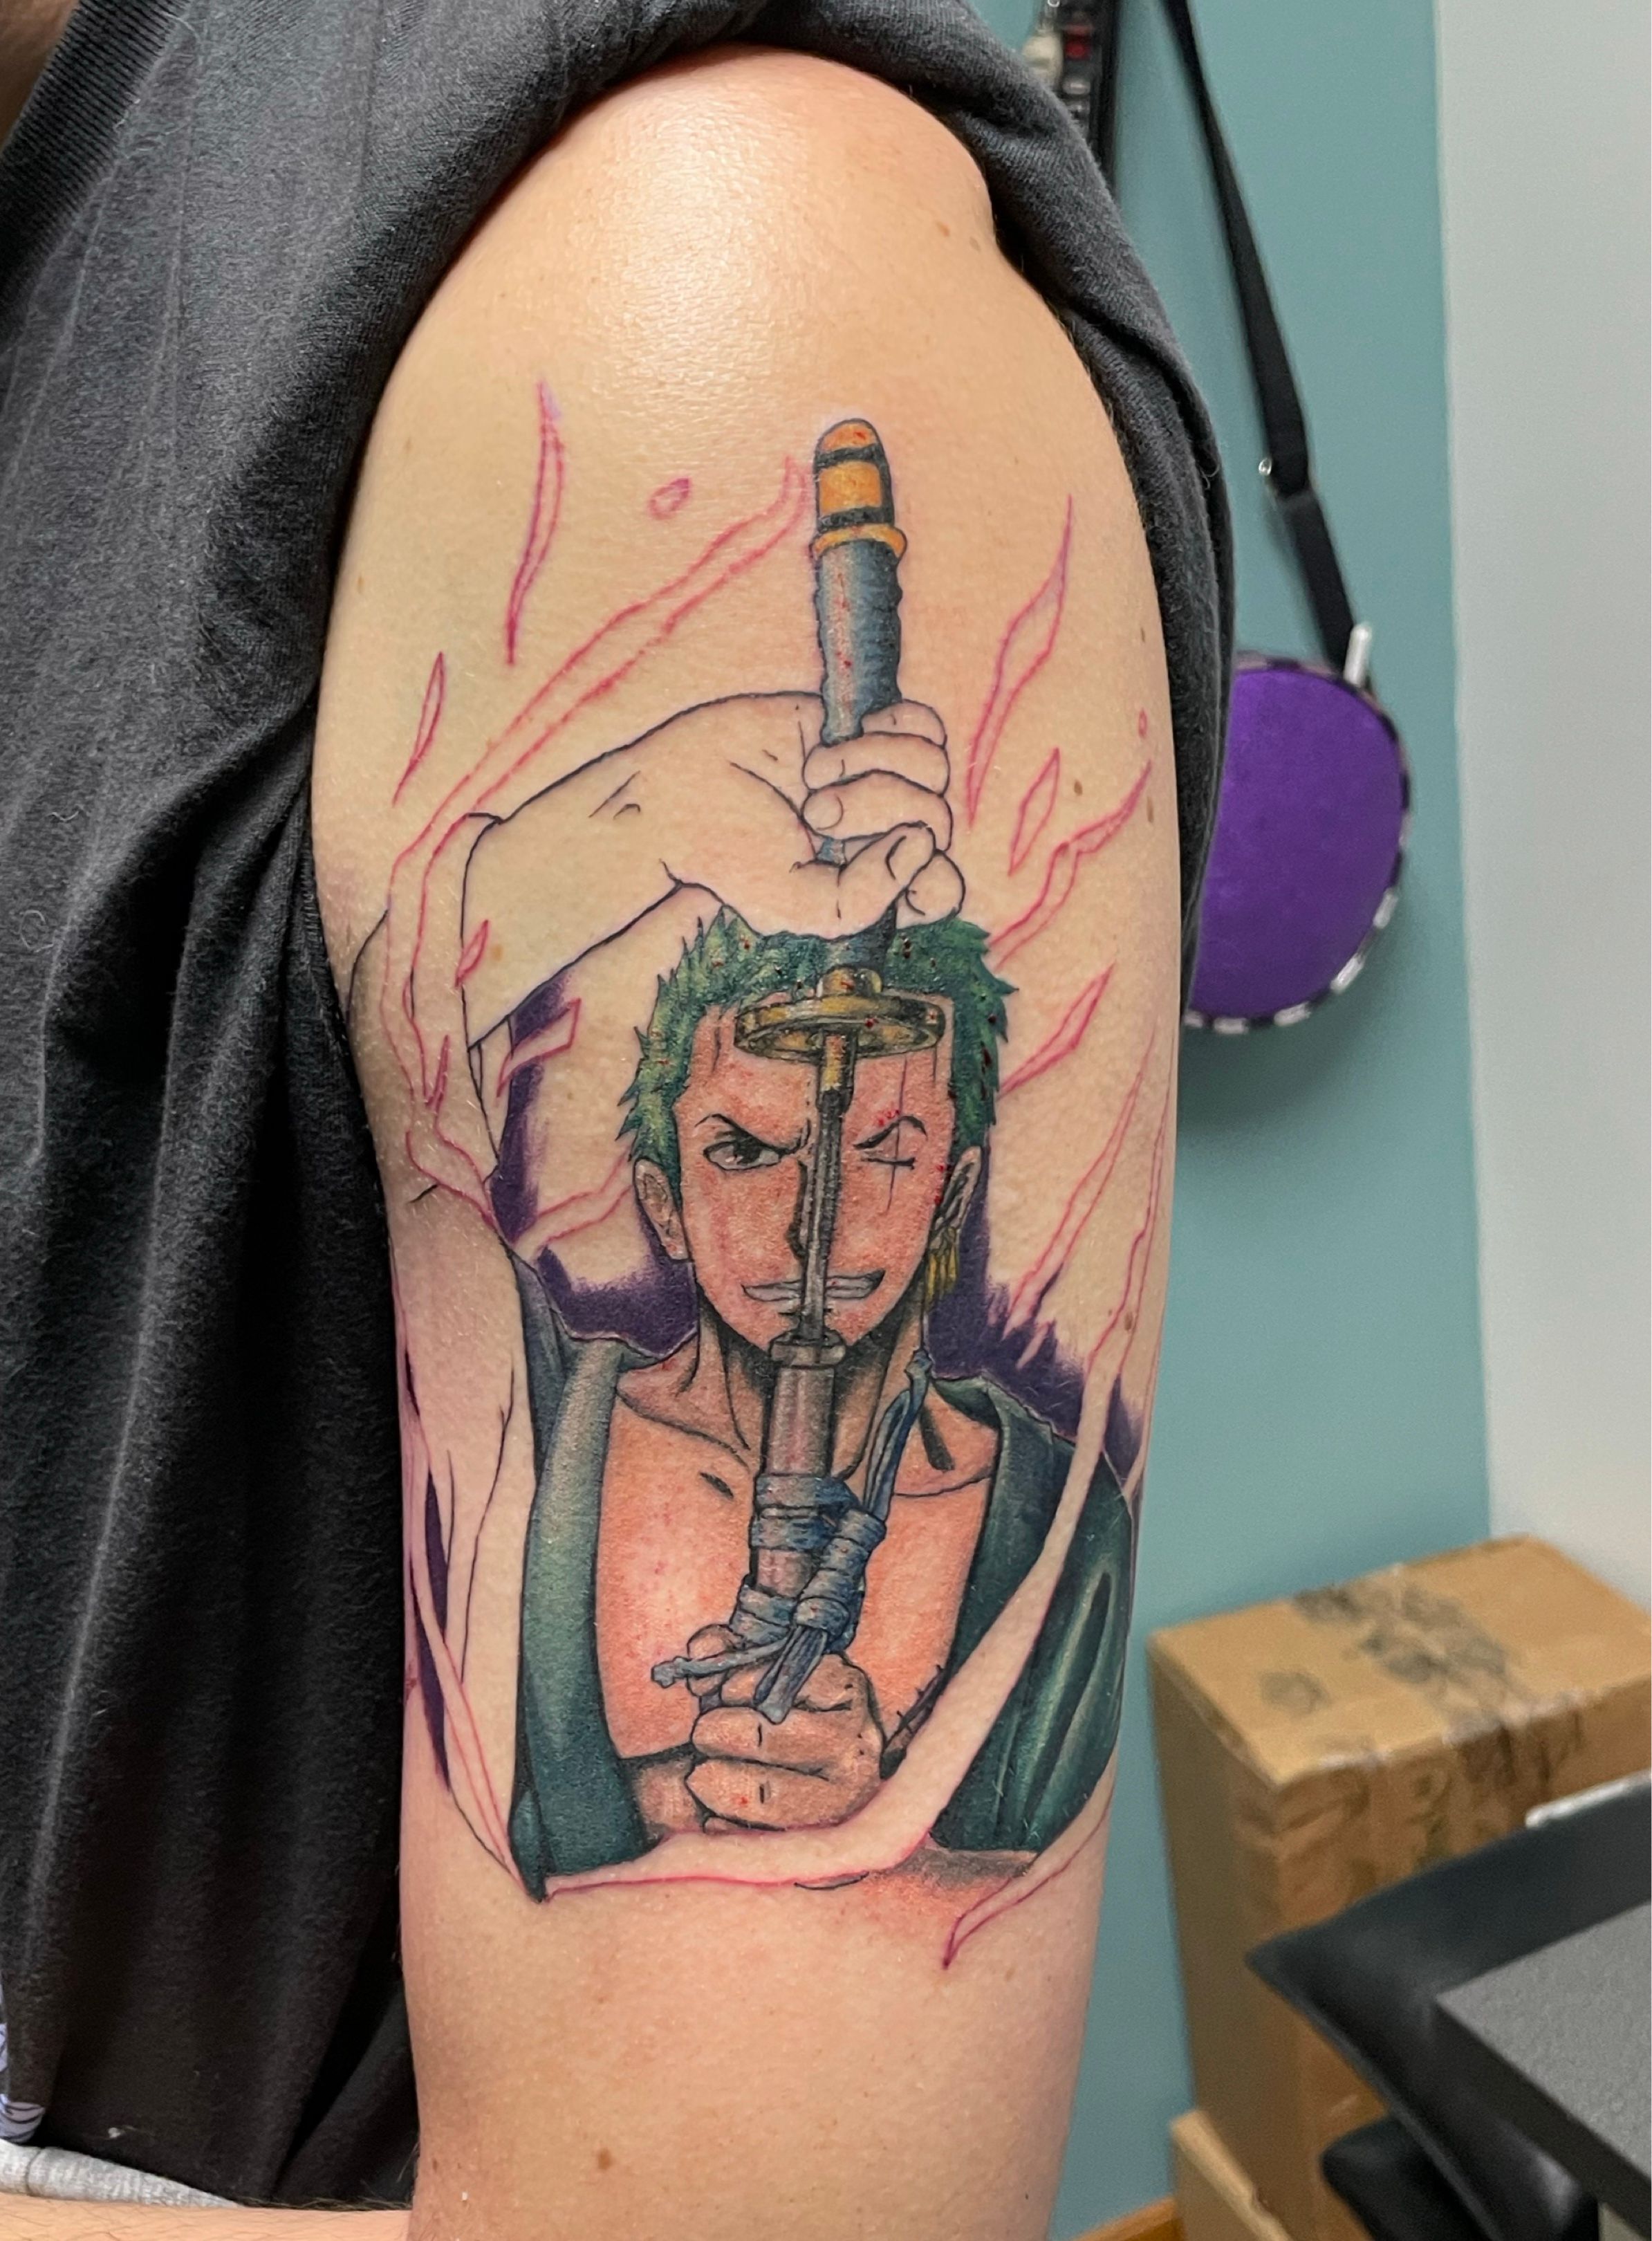 Old London Road Tattoos  This is Roronoa Zoro from the anime One Peice